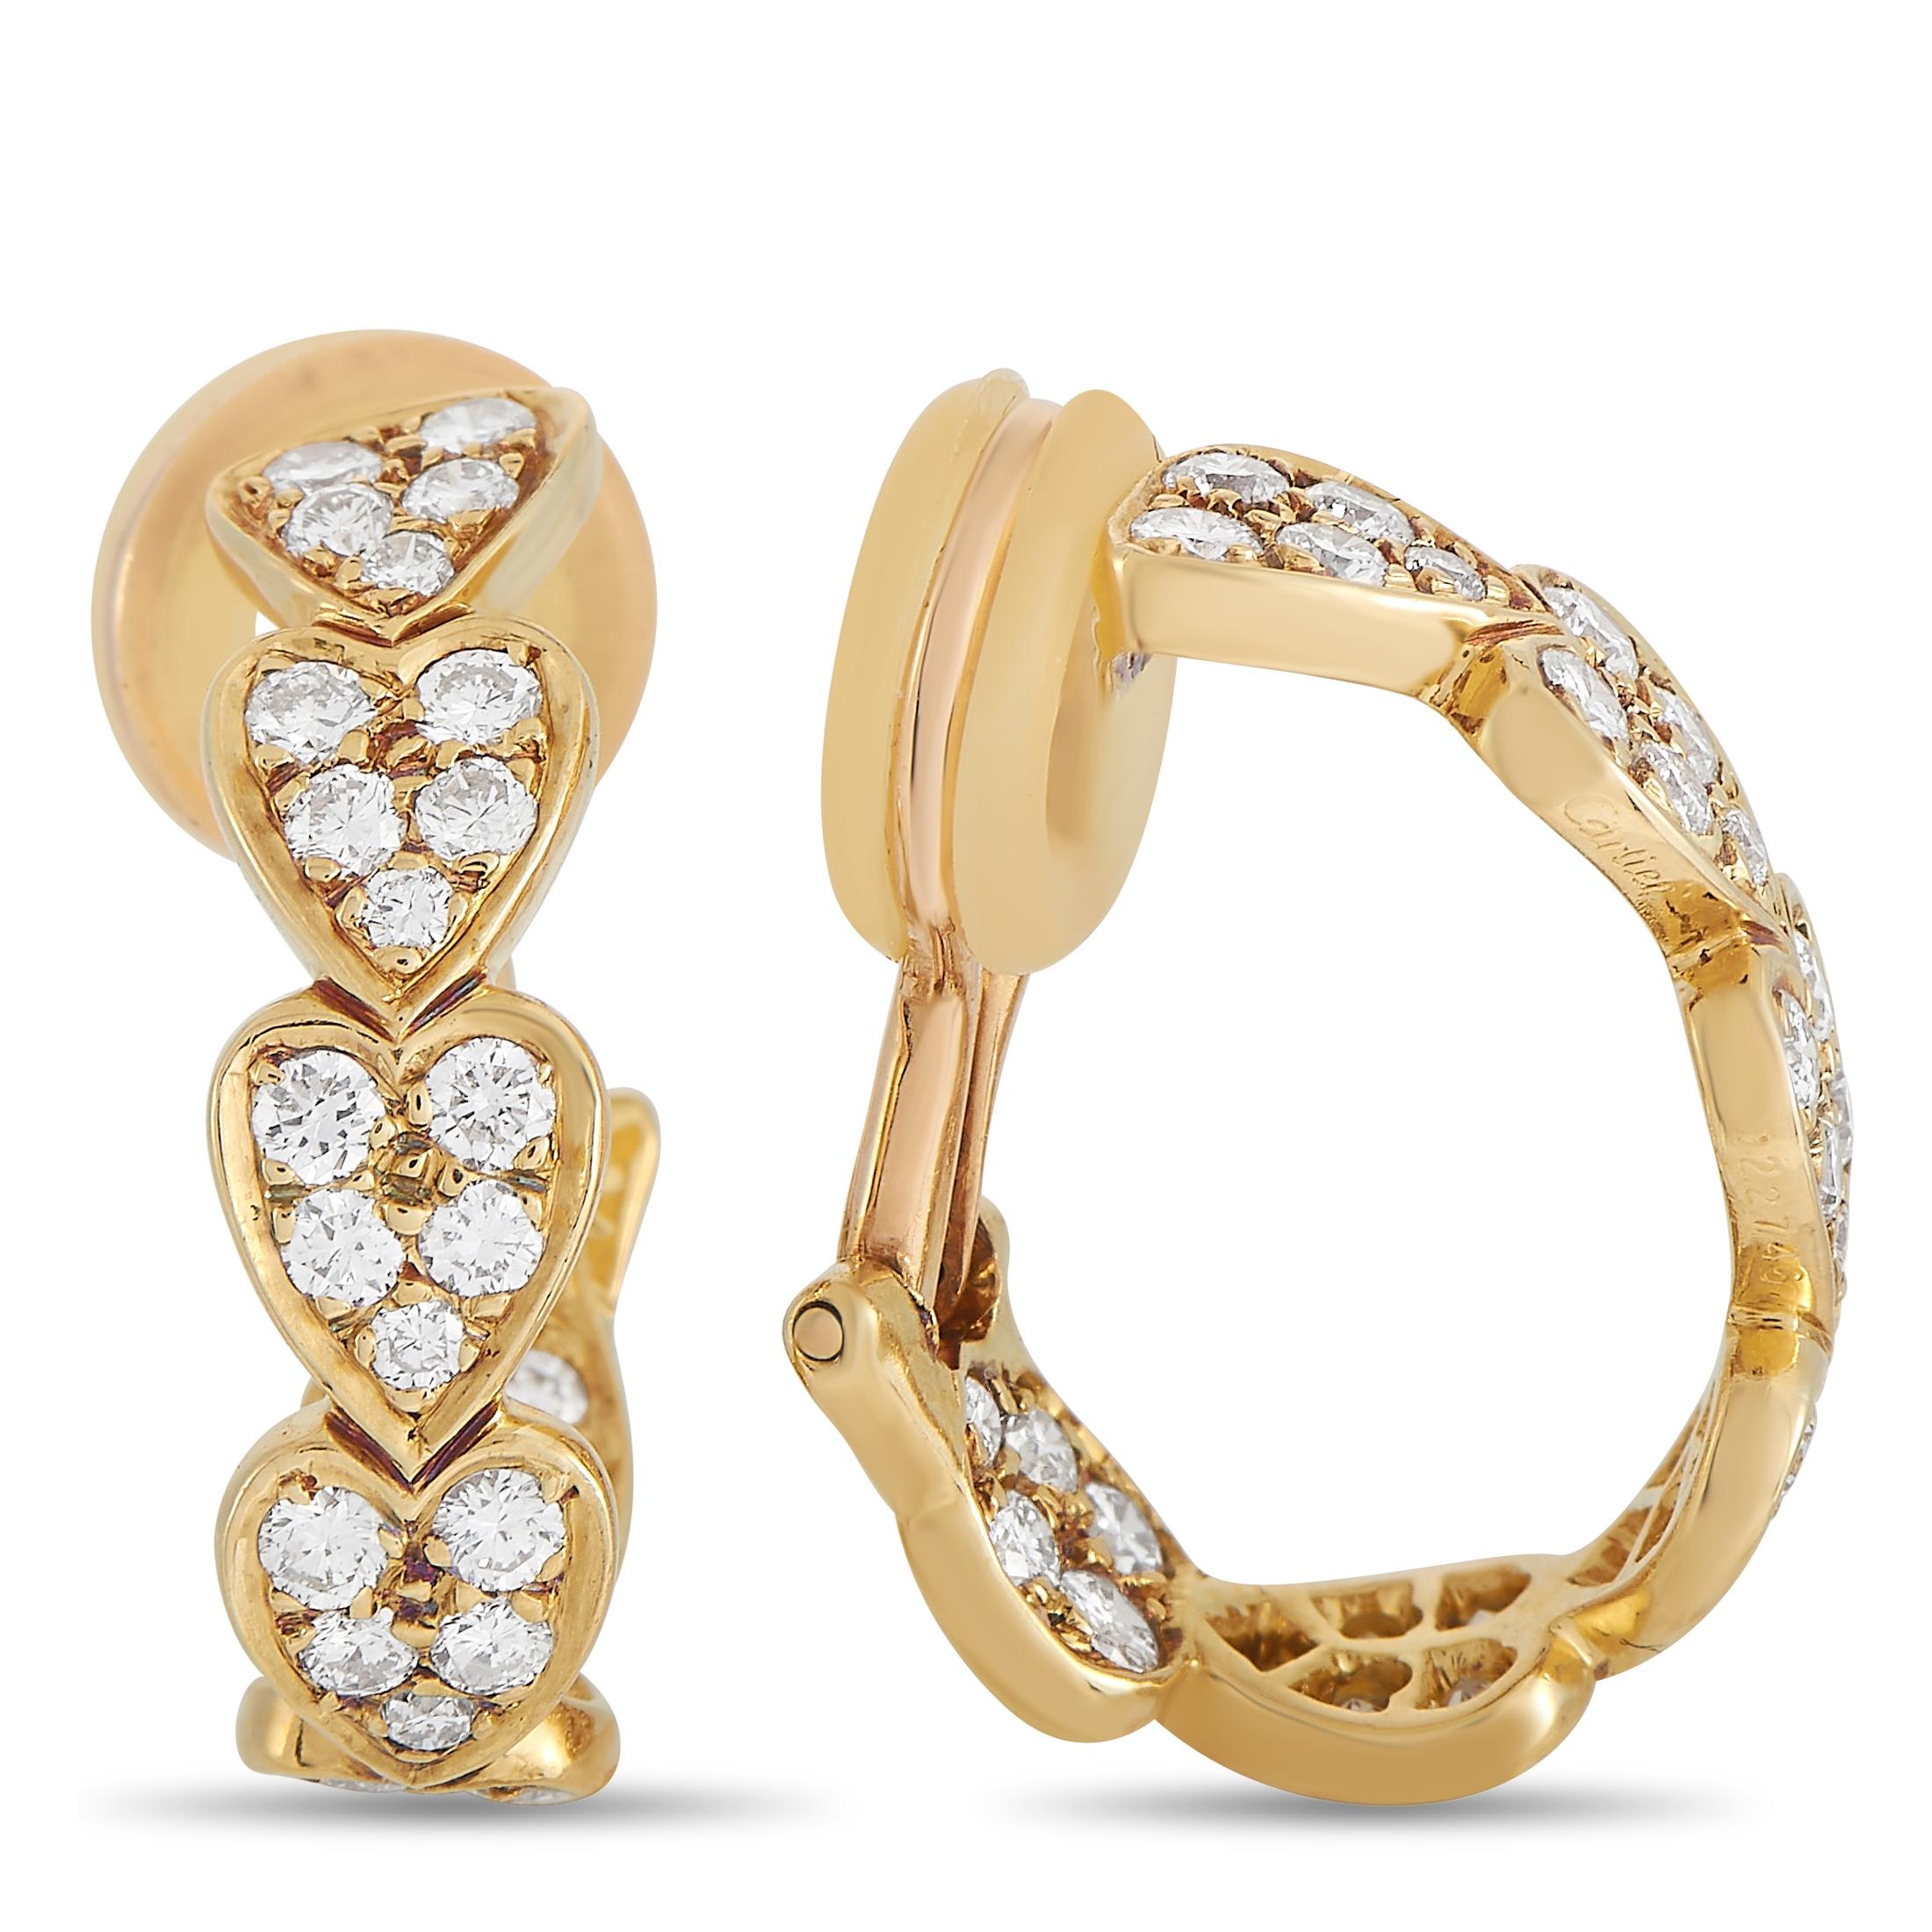 These Cartier earrings are inherently romantic. A series of hearts in 18K Yellow Gold make up the elegant hoop-shaped design, but it’s the glittering array of diamonds totaling 1.35 carats that truly brings them to life. Each one measures .25” long,